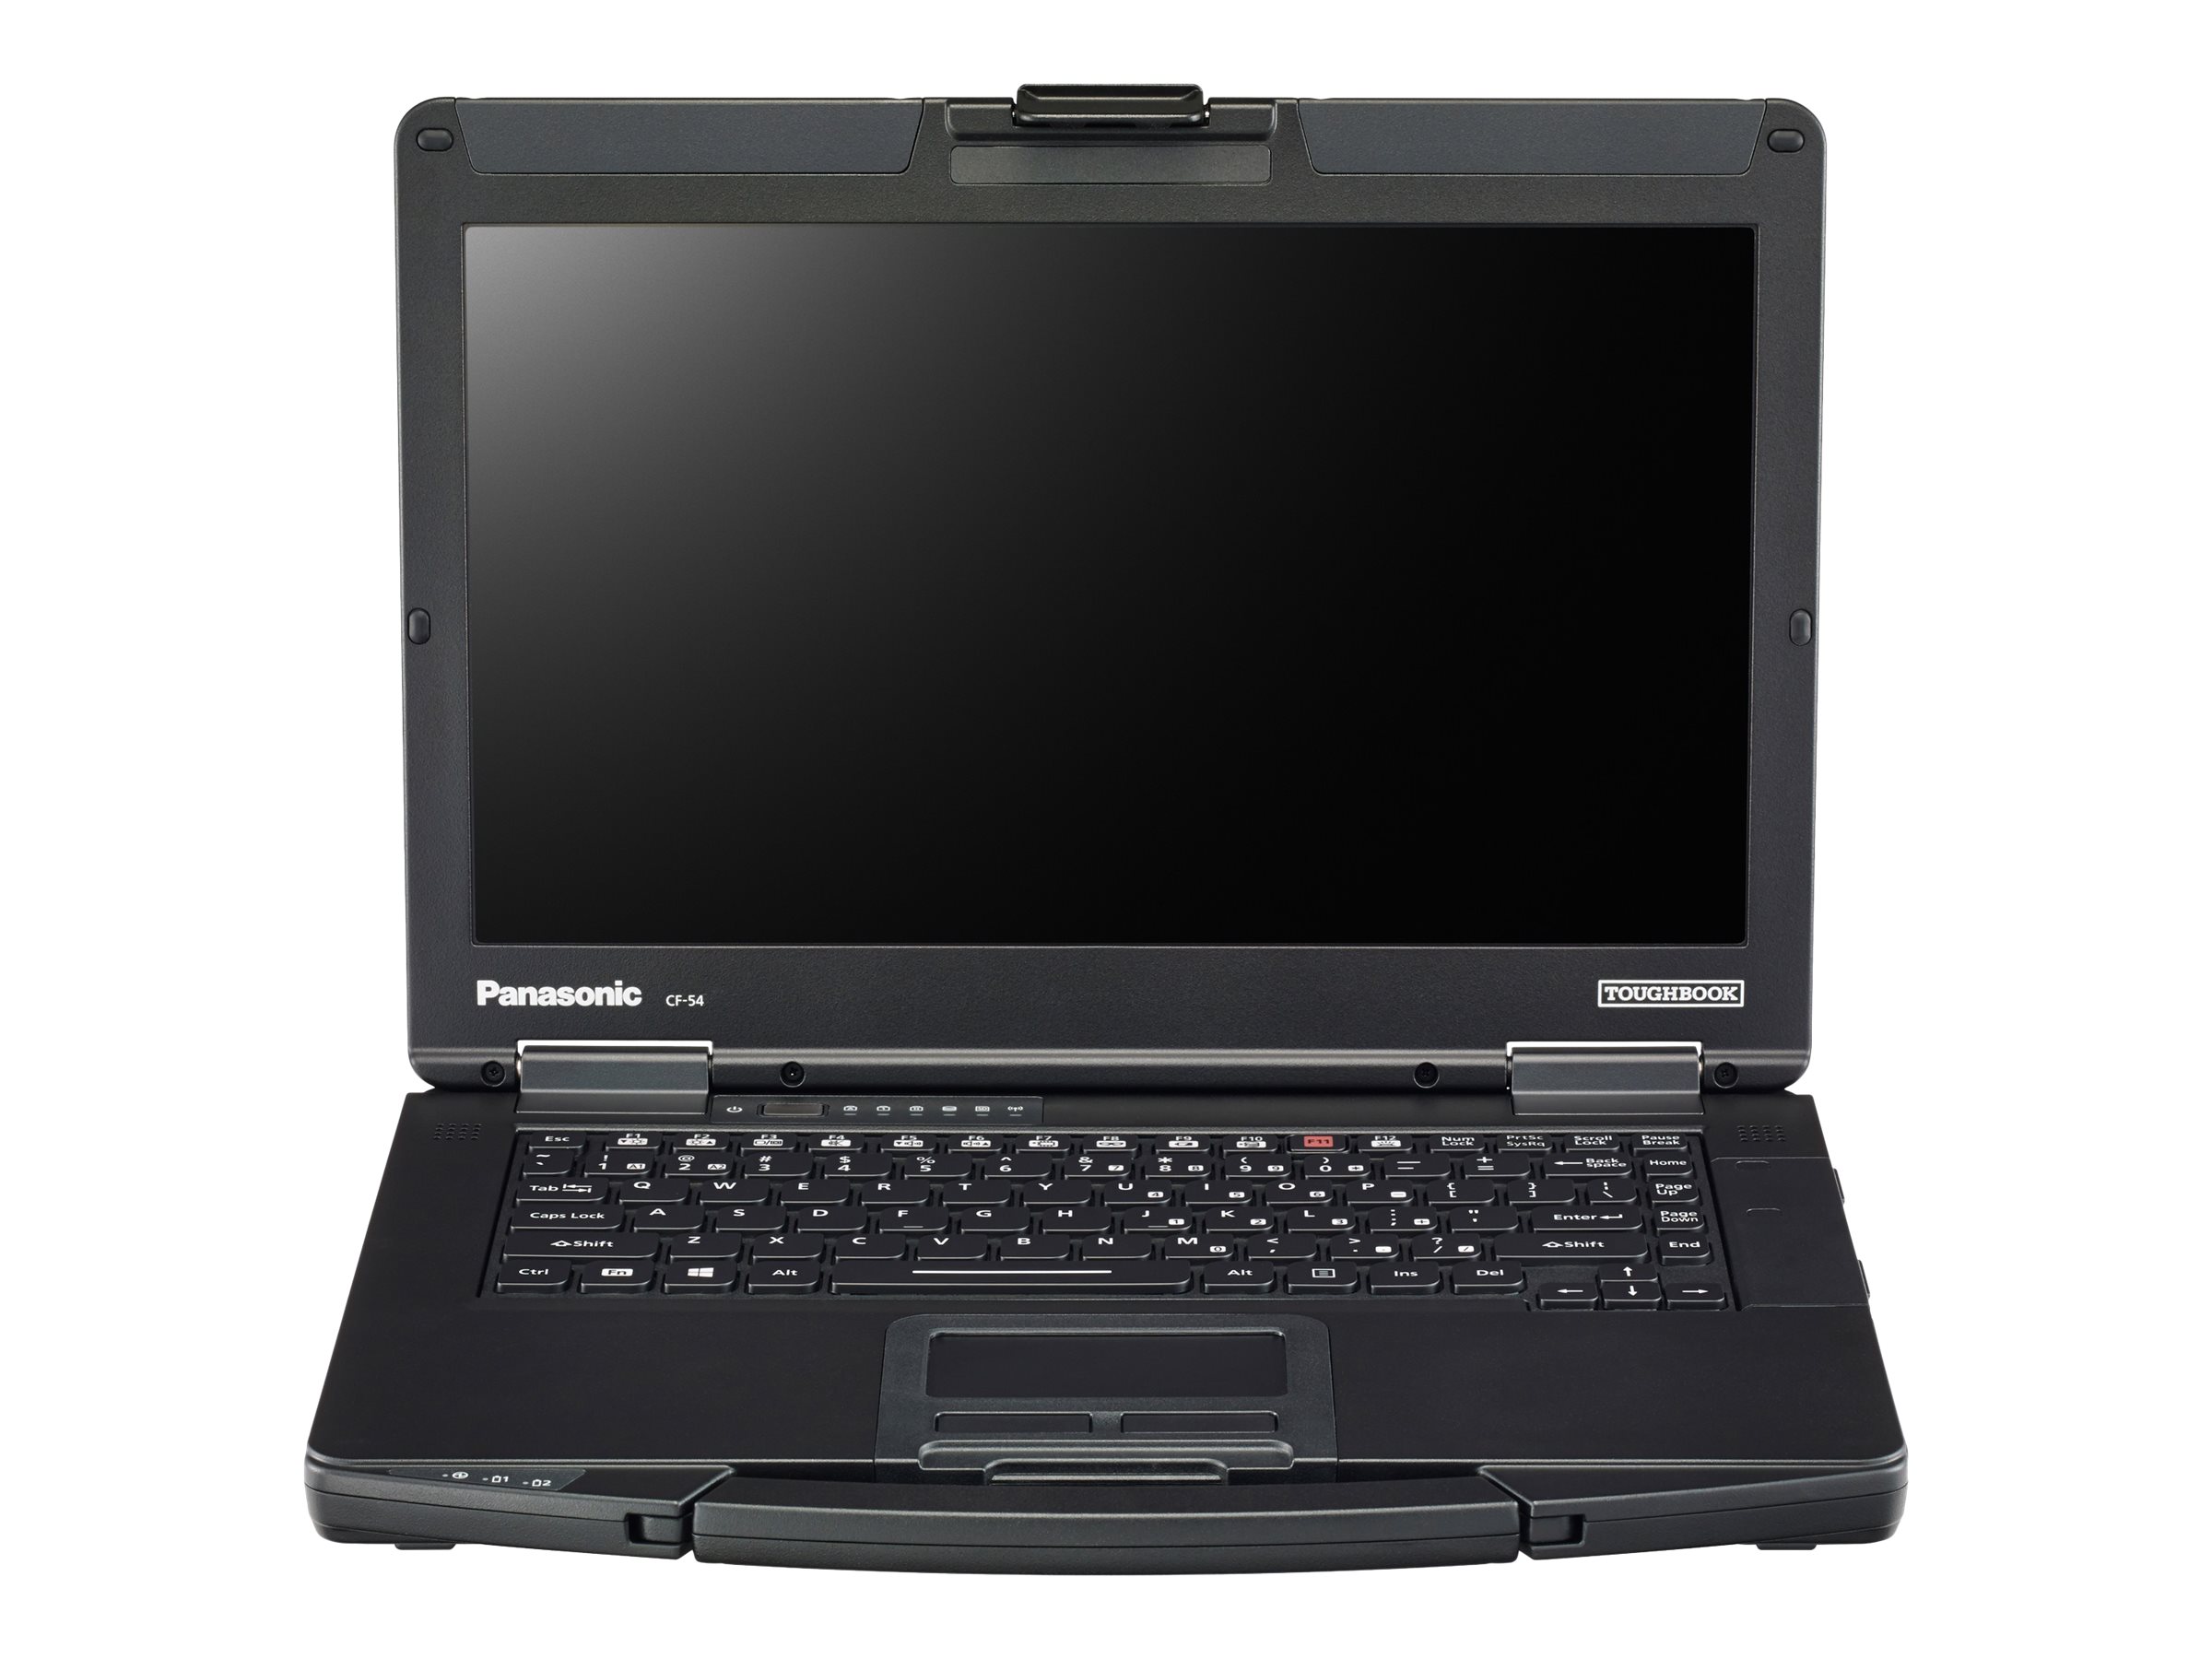 Panasonic Toughbook 54 Prime - Rugged - Intel Core i7 - 6600U / up to 3.4 GHz - vPro - Win 10 Pro 64-bit - HD Graphics 520 - 8 GB RAM - 256 GB SSD - DVD SuperMulti - 14" 1366 x 768 (HD) - Wi-Fi 5 - with Toughbook Preferred - image 3 of 16